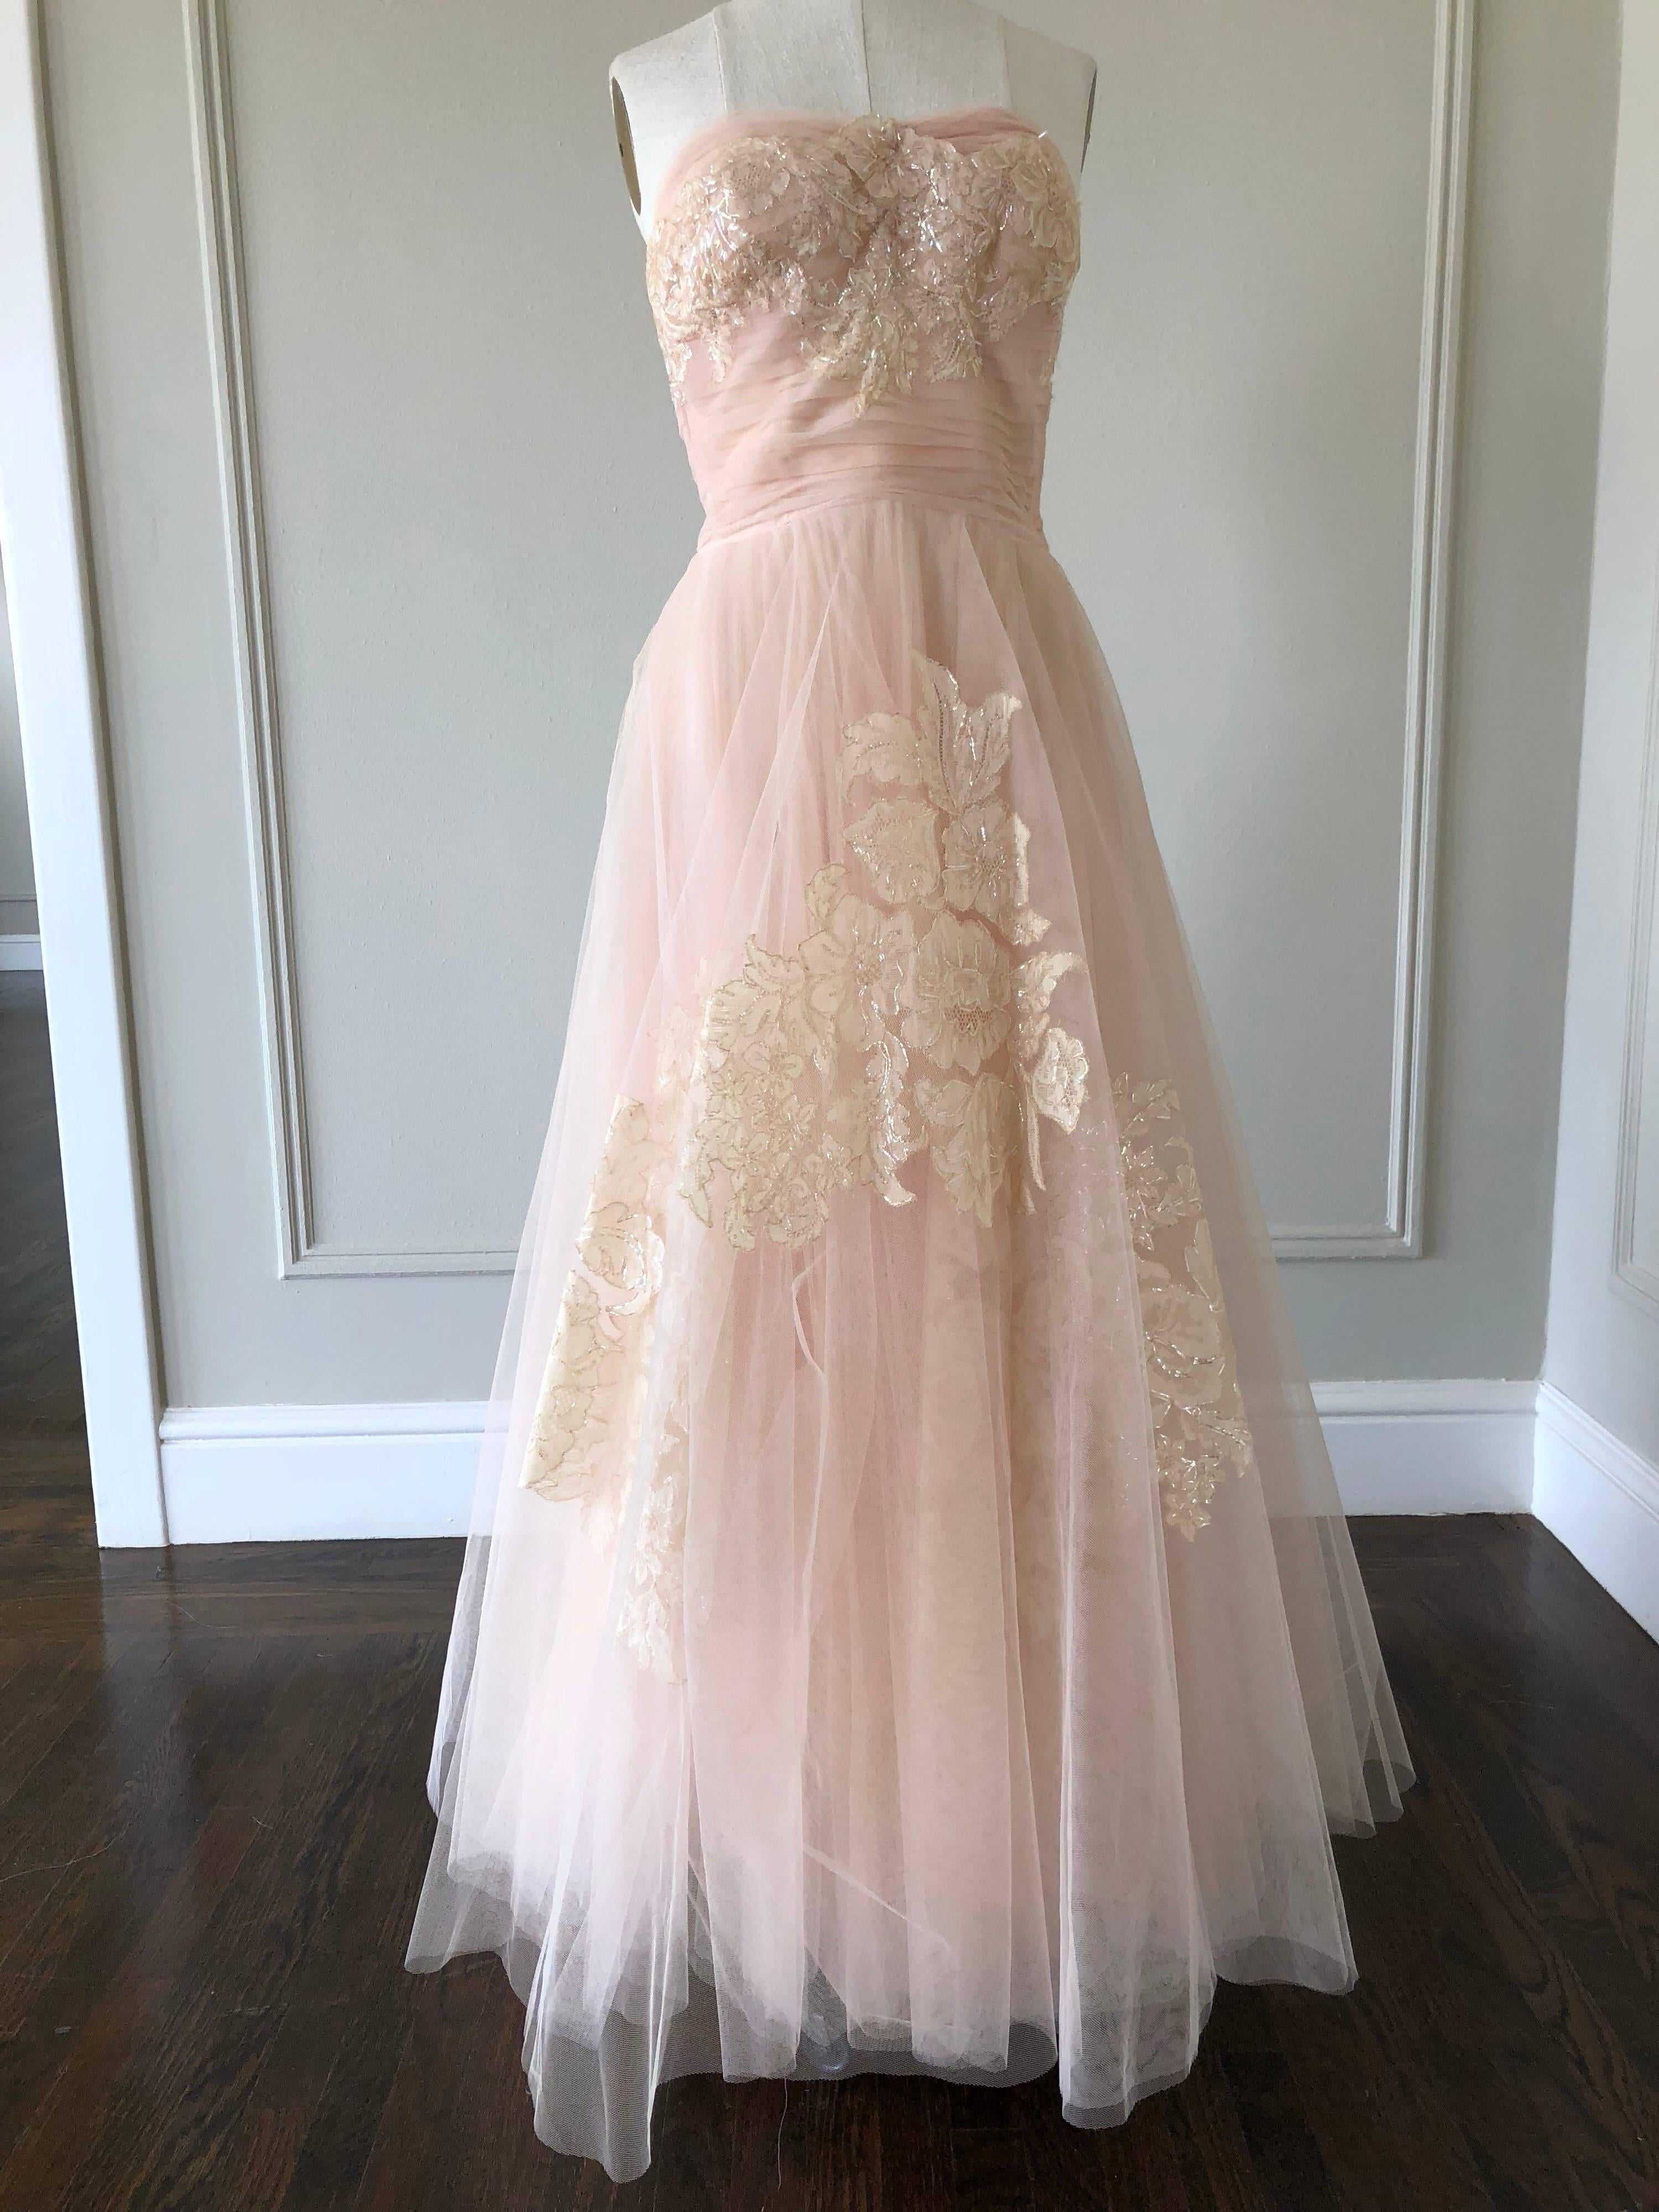 Women's 1950s Pink Champagne Tulle Party Dress W/ Lace & Sequin Bodice & Trim